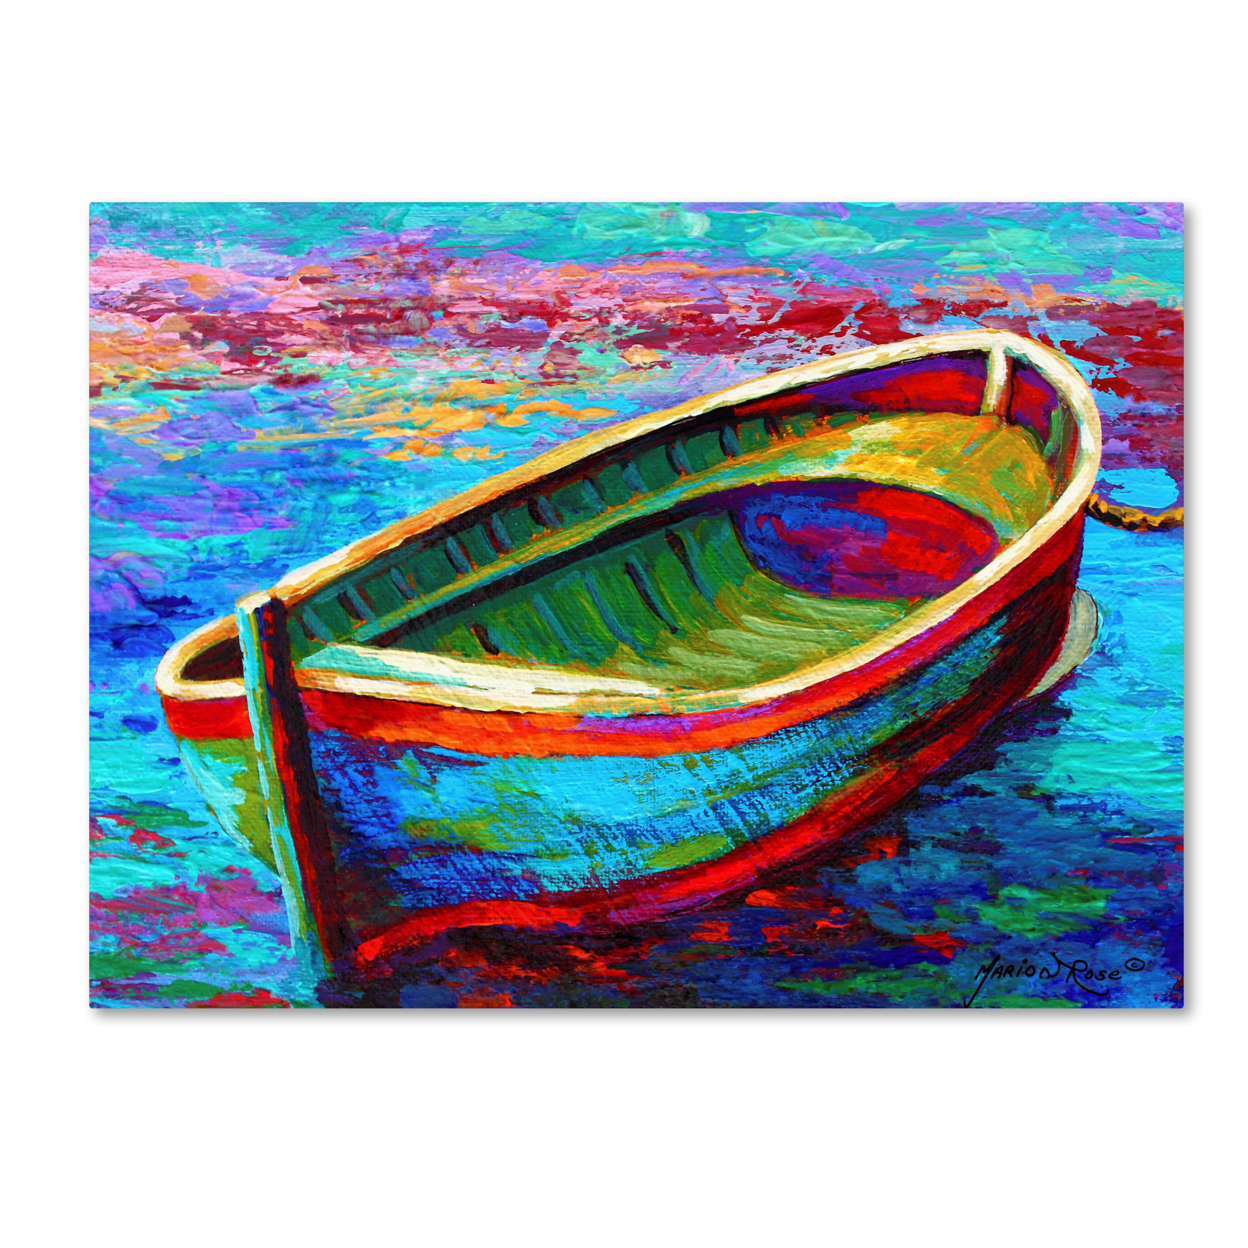 Marion Rose 'Boat 9' Ready To Hang Canvas Art 35 X 47 Inches Made In USA